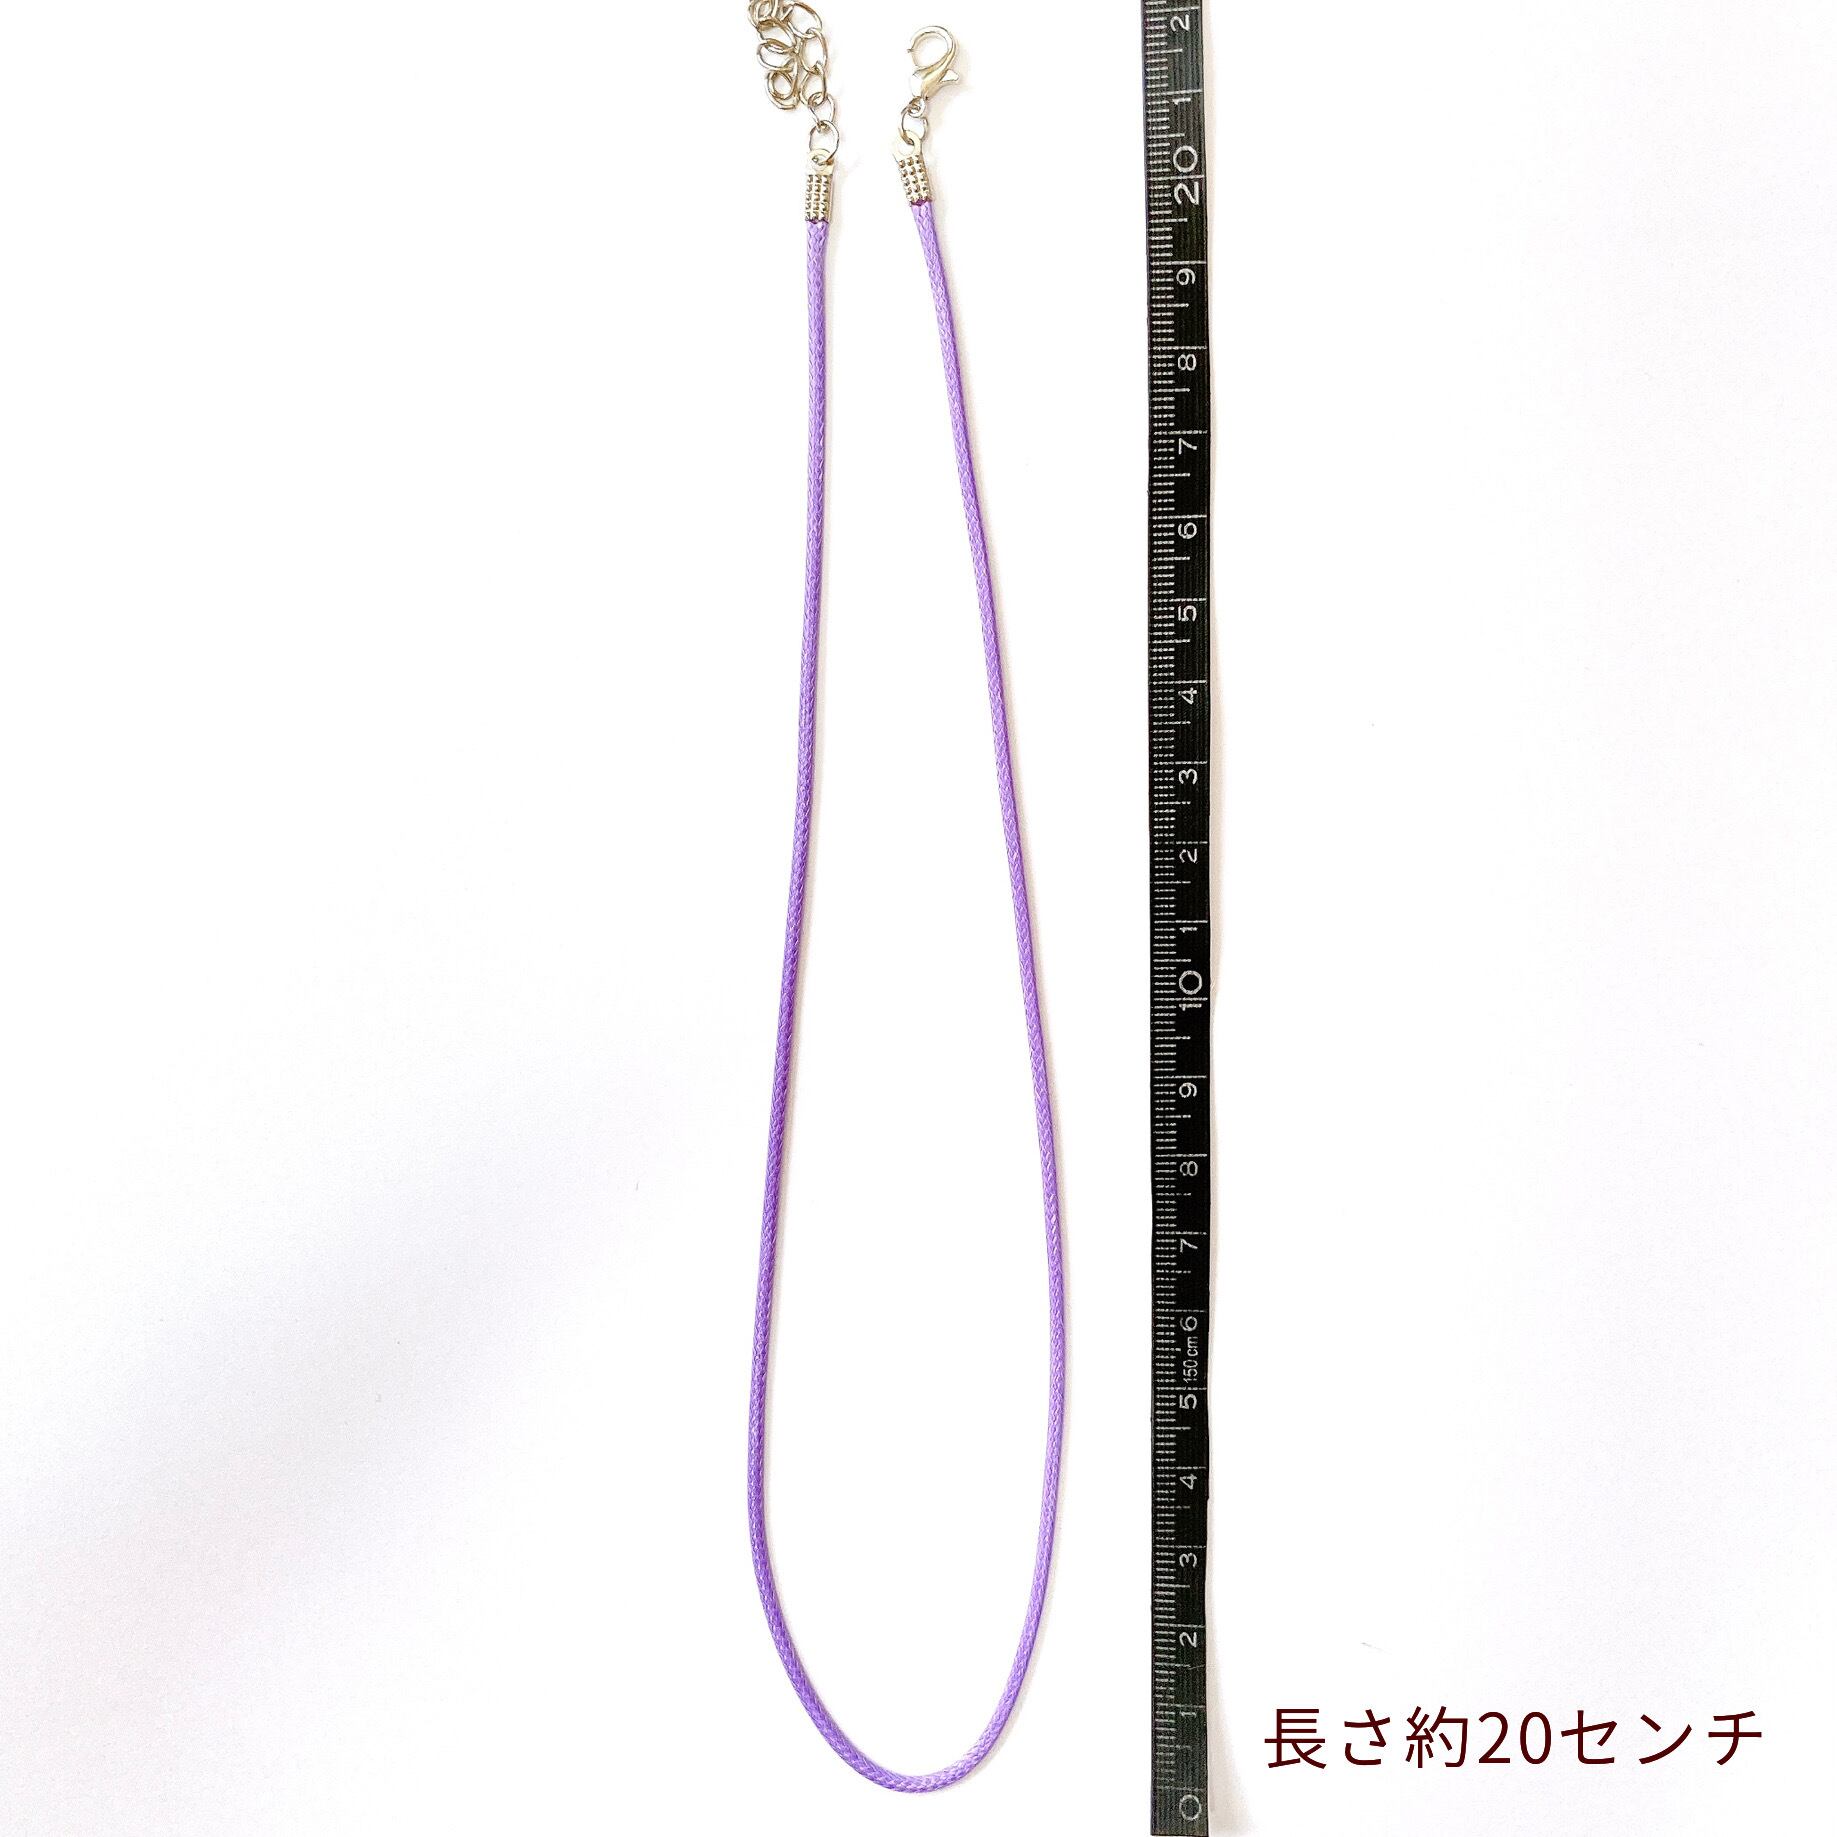 little   necklace  （ c - 2 ）  キッズネックレス